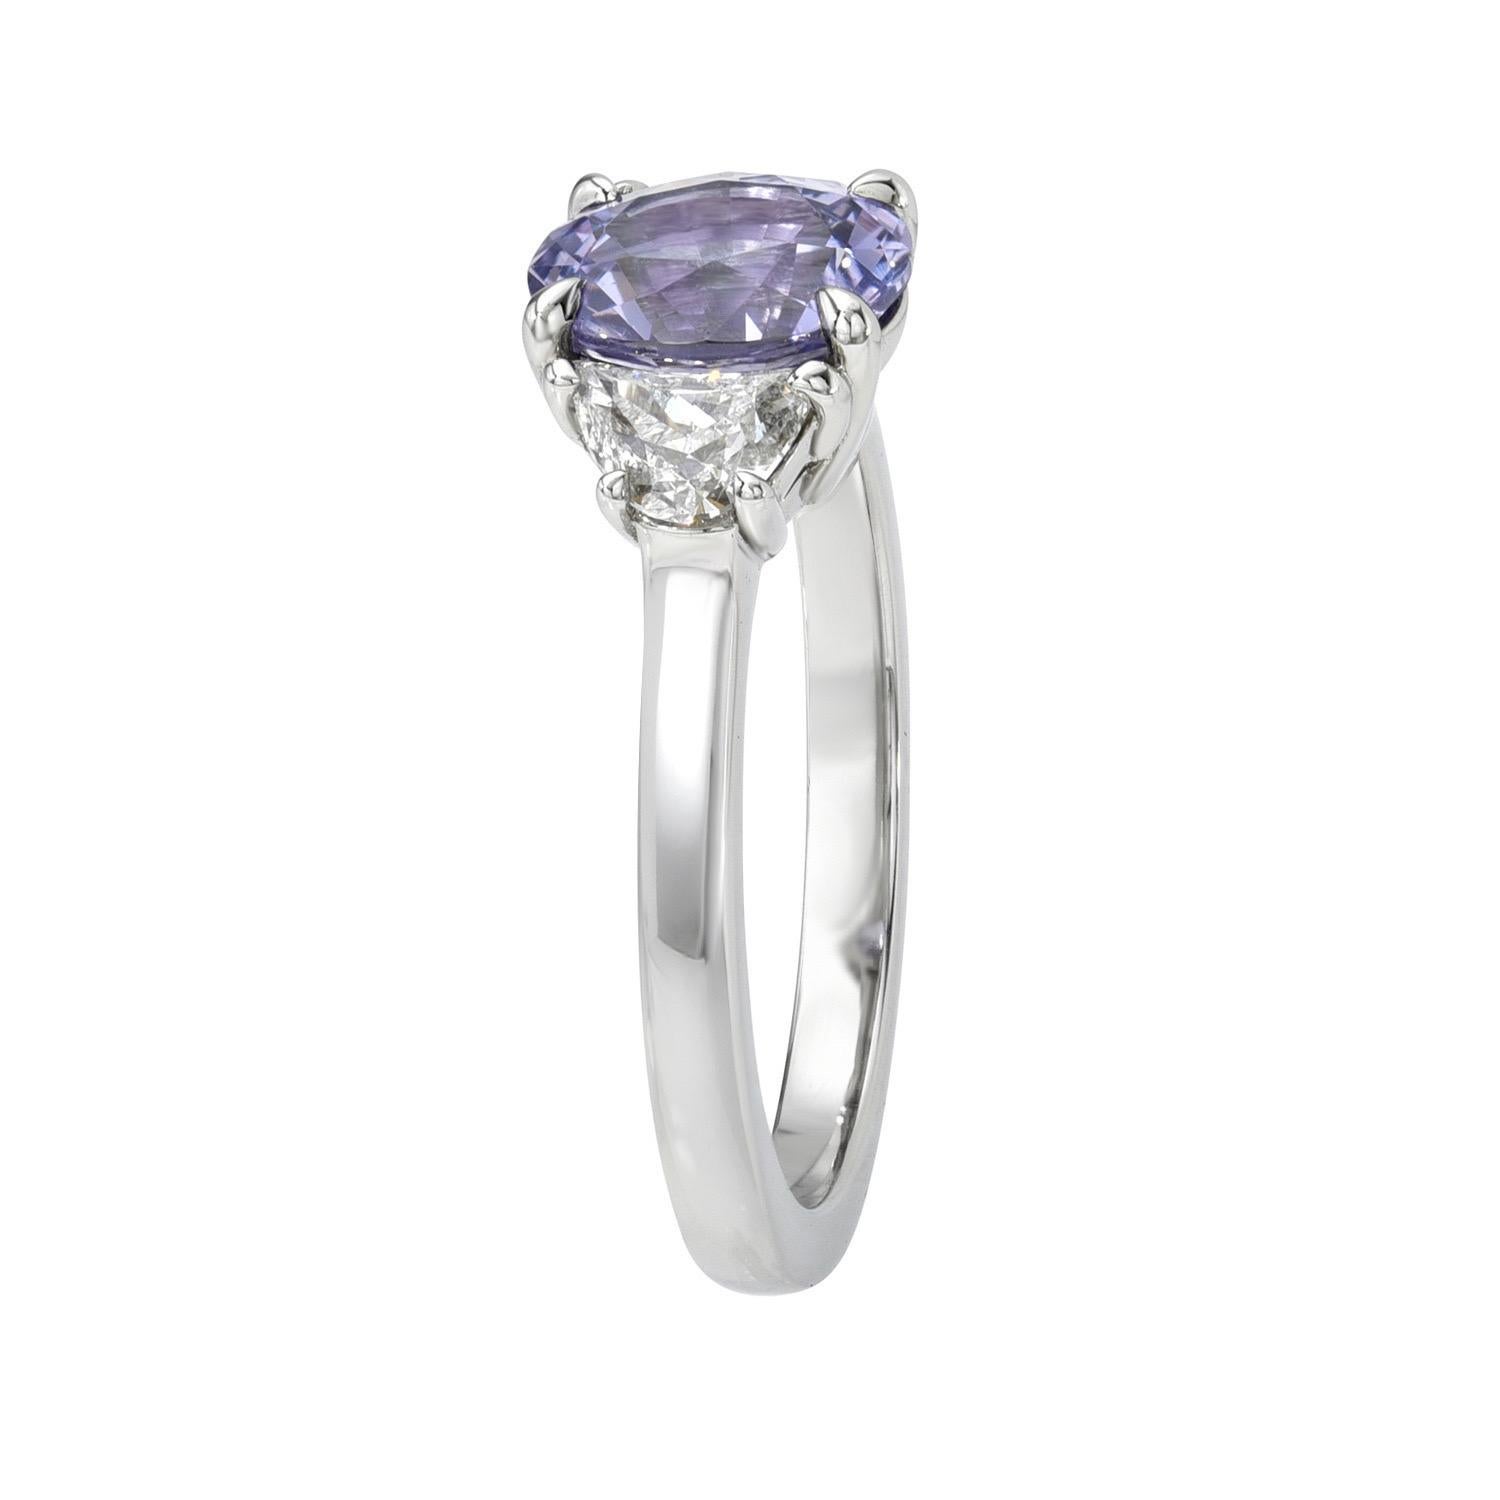 Contemporary Unheated Color Change Sapphire Ring 1.71 Carat Violet To Pinkish Purple Oval For Sale